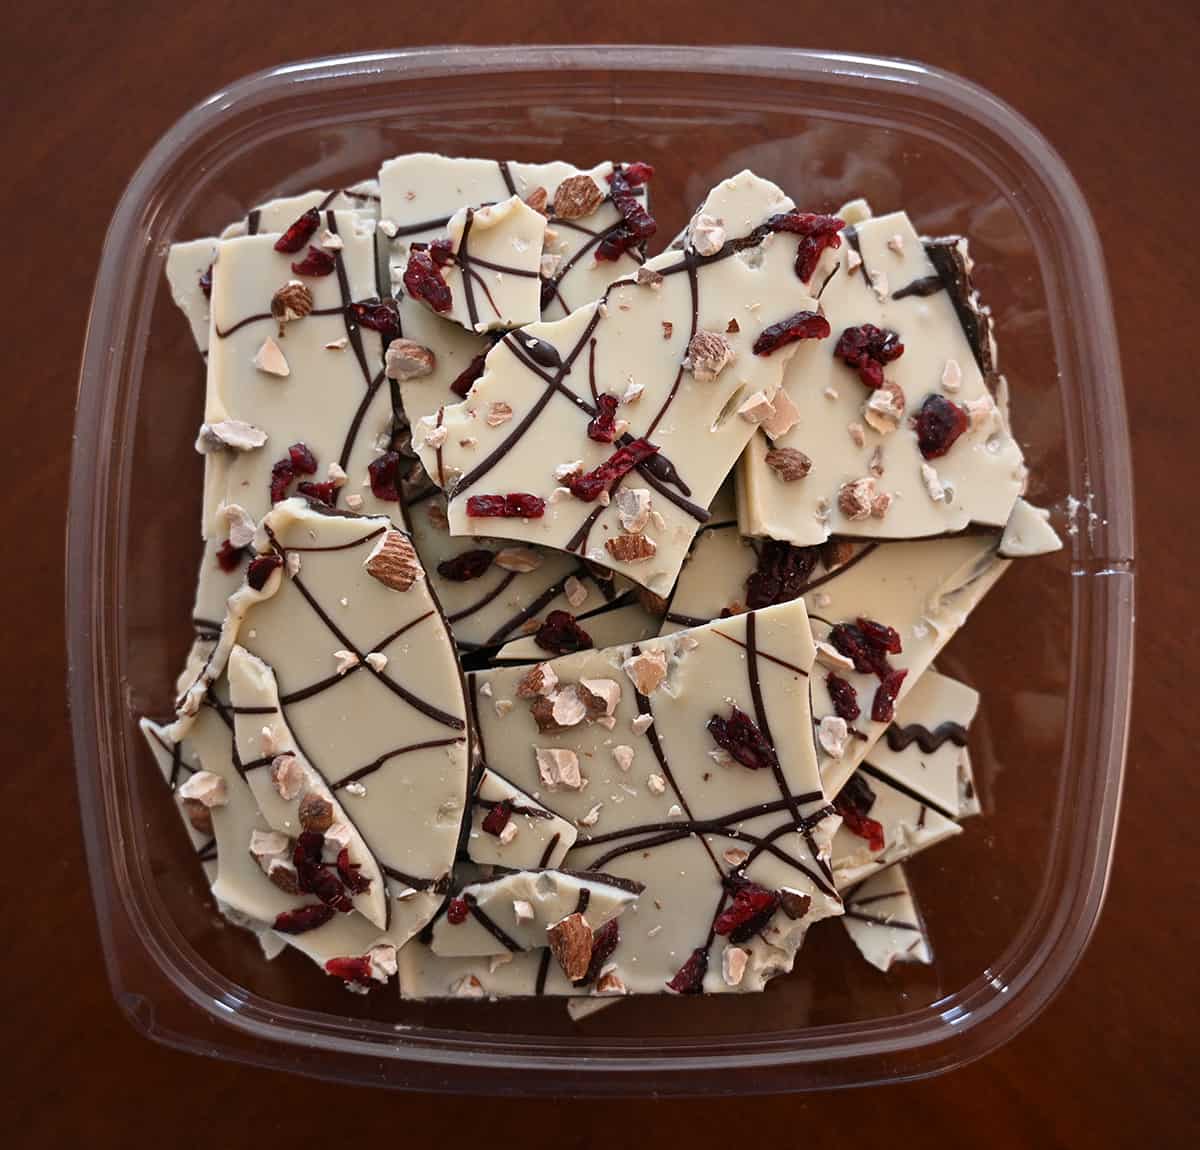 Top down image of an opened container of cranberry almond bark sitting on a table so you can see the almond bark.